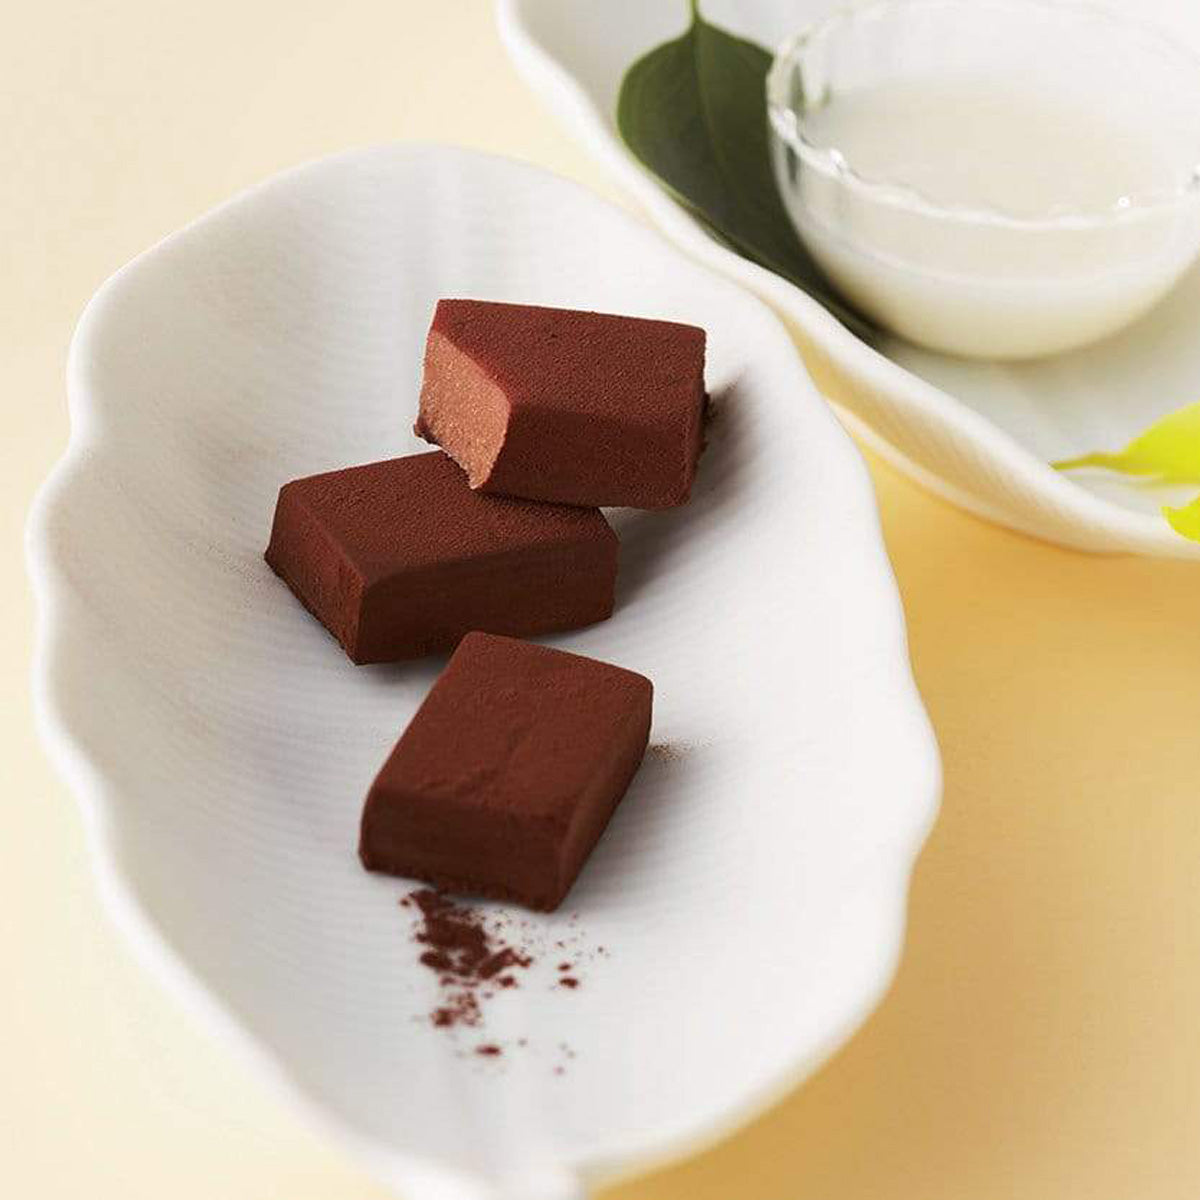 ROYCE' Chocolate - Nama Chocolate "Mild Cacao" - Image shows brown blocks of chocolates on a white leaf-shaped plate. Accents include another white leaf-shaped plate with a bowl of milk and green leaves. Background is in light brown.